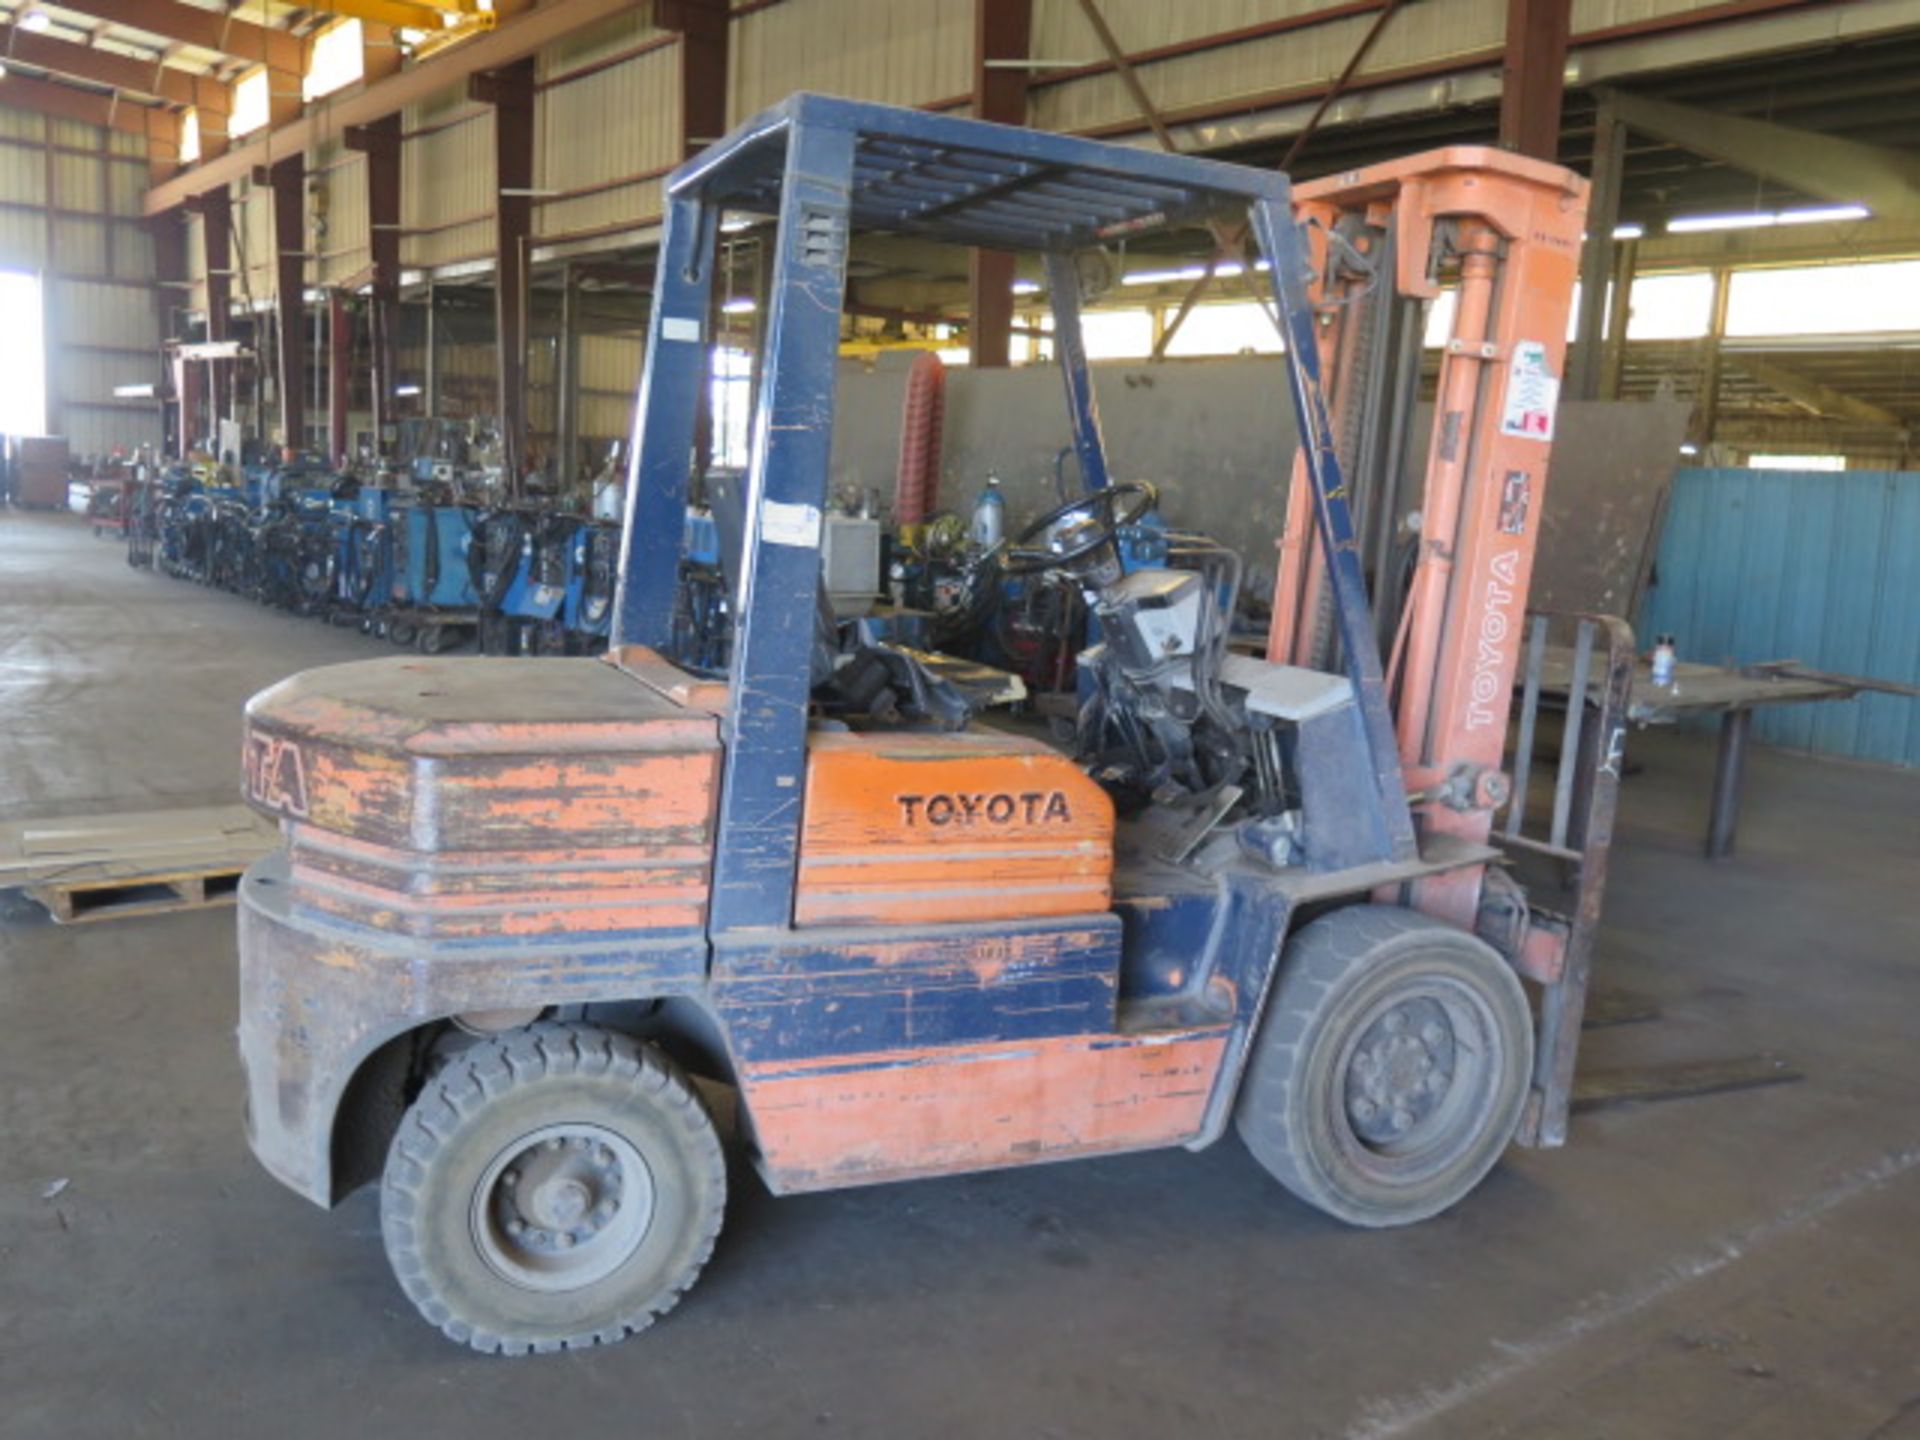 Toyota 02-5FG30 5800 Lb Cap Gas Powered Forklift s/n 70247 w/ 3-Stage,185” Lift height, SOLD AS IS - Image 3 of 11